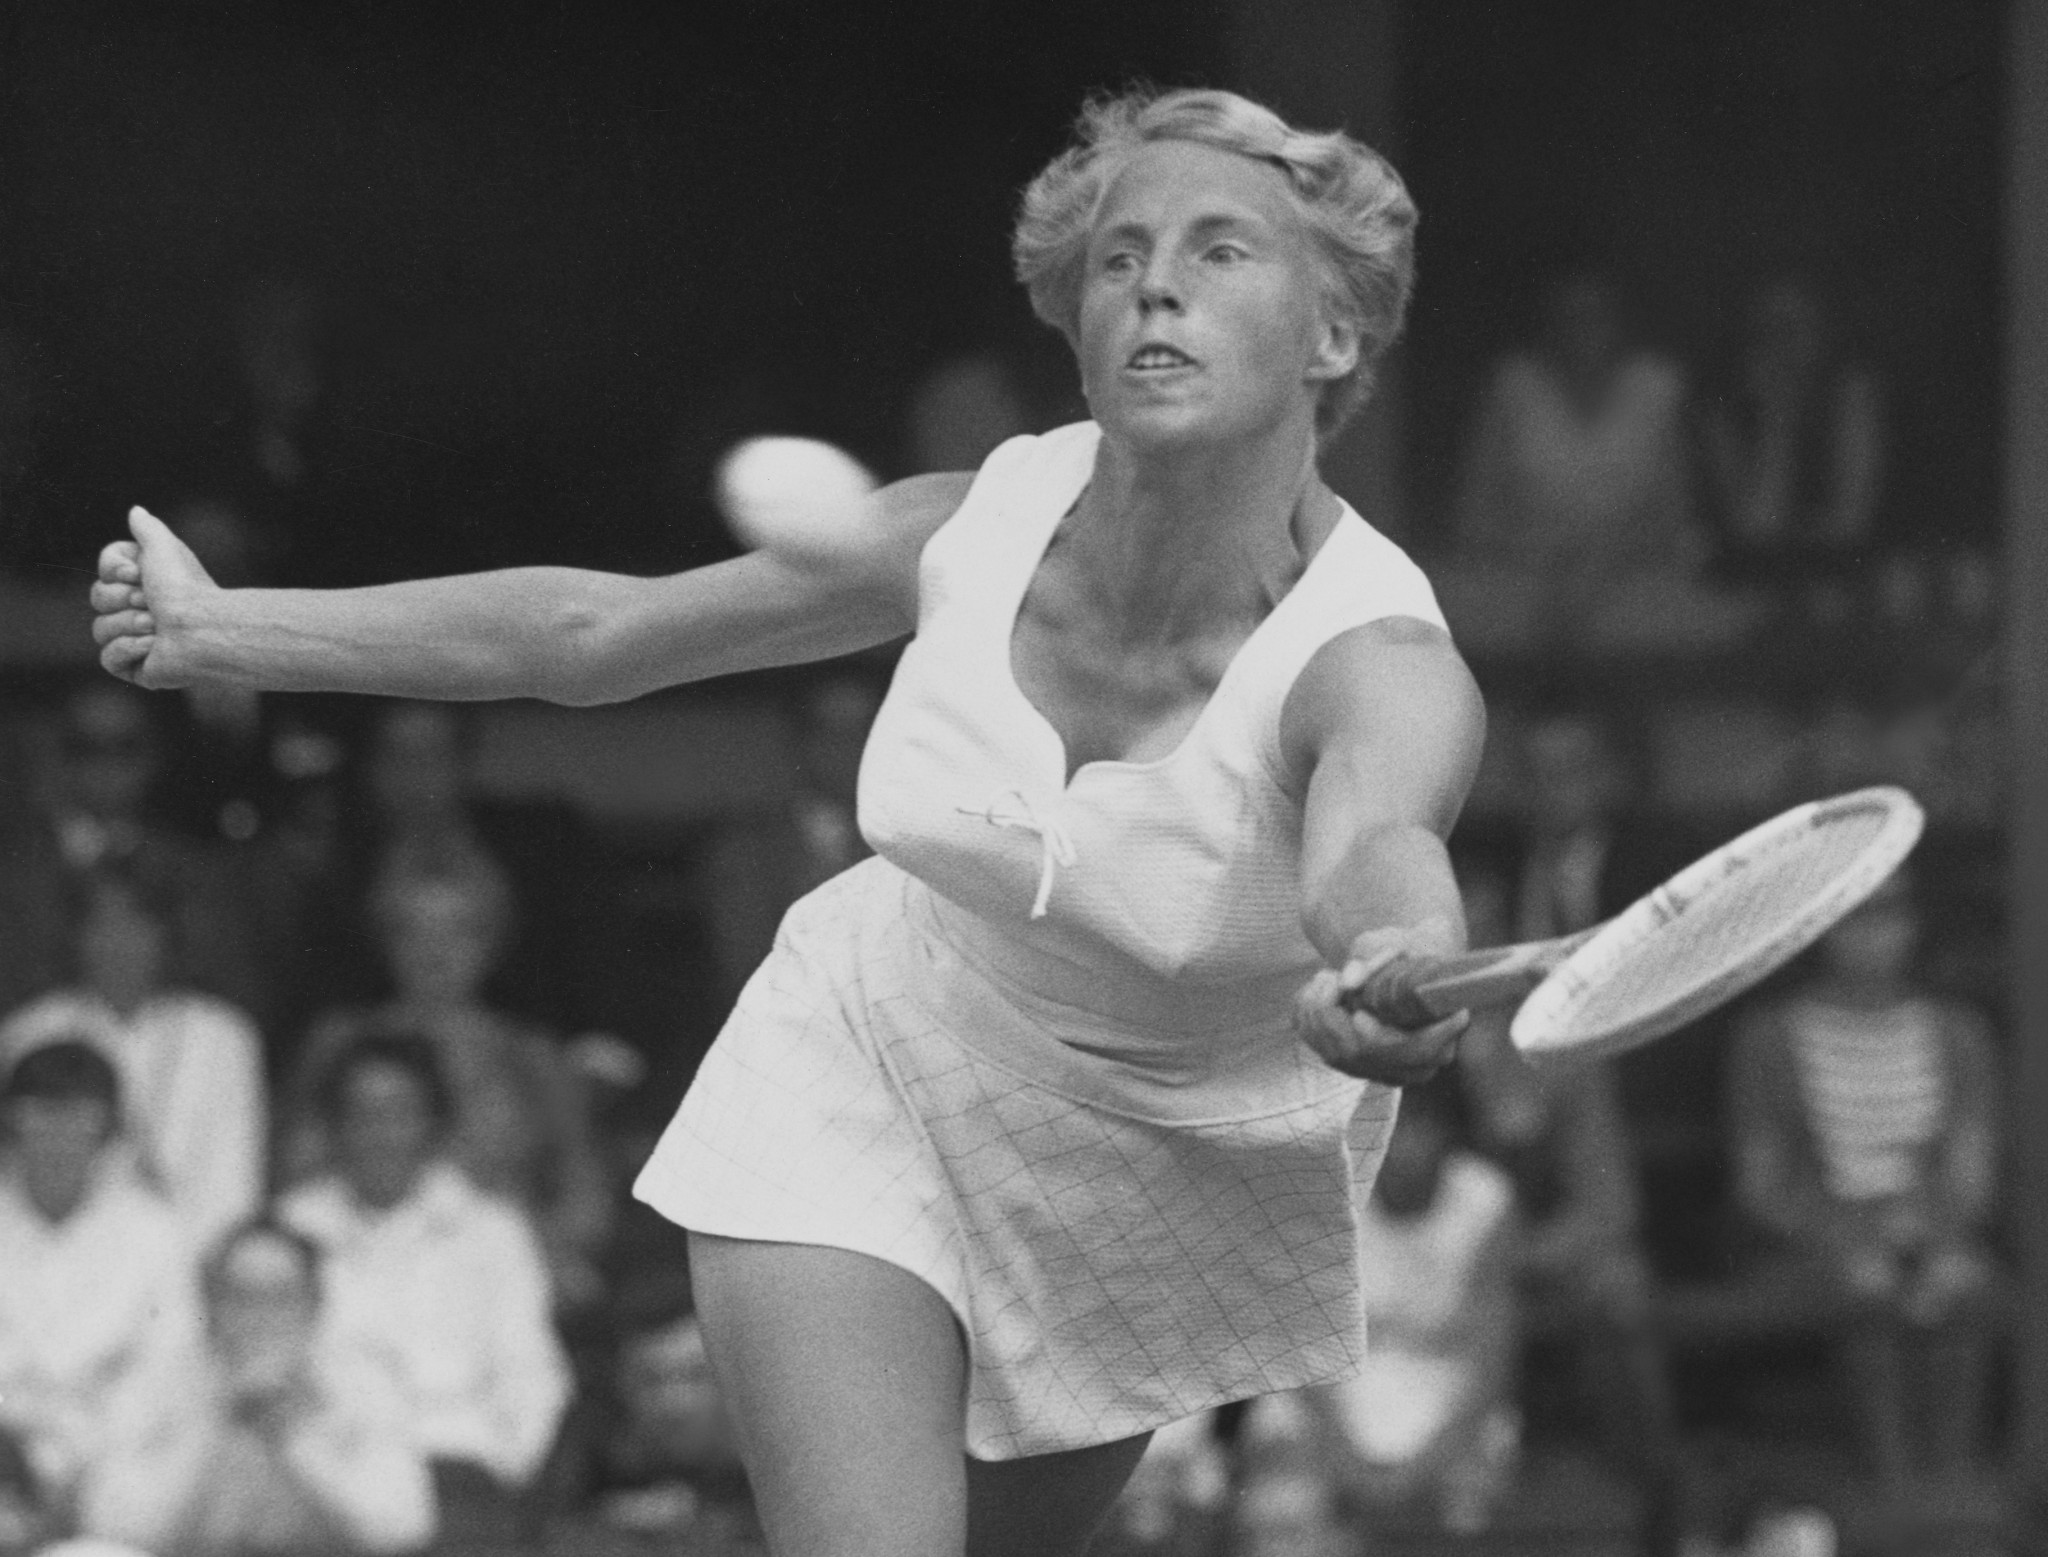 Birmingham tennis player Ann Jones won both Wimbledon and the French Open ©Getty Images